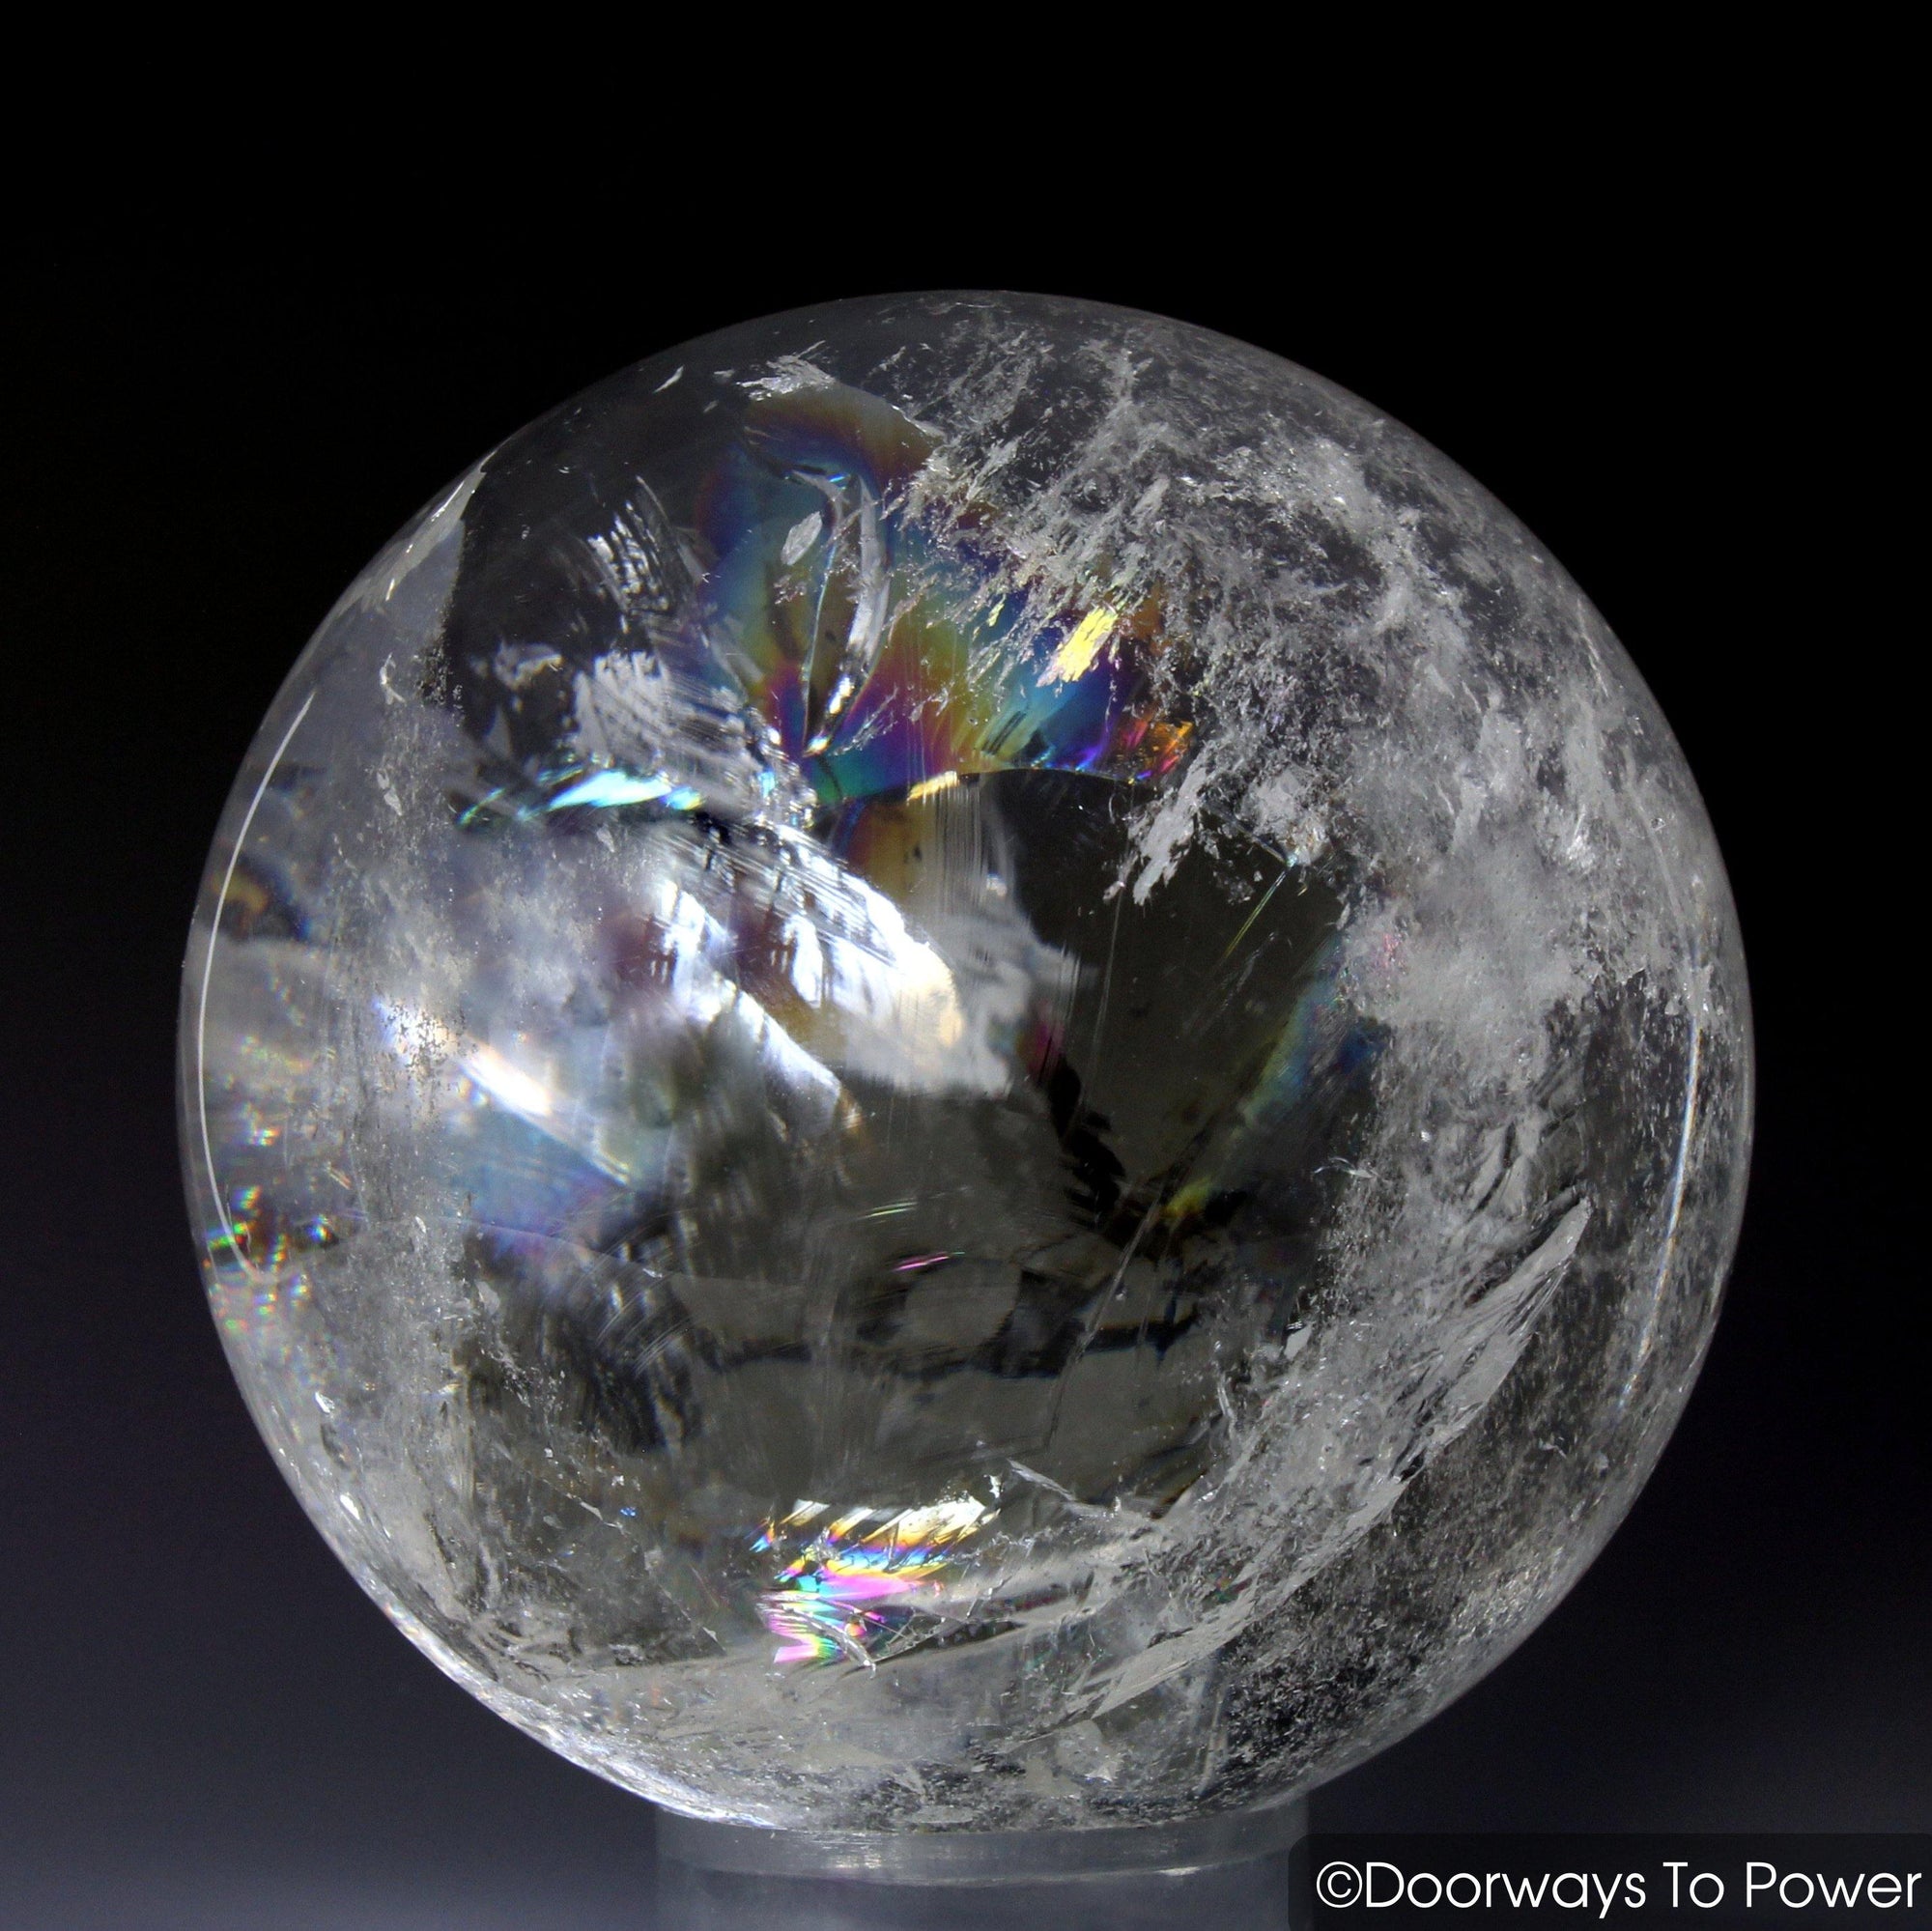 Starseed Lemurian Seed Quartz Crystal Sphere Ball 'Holographic Connection'